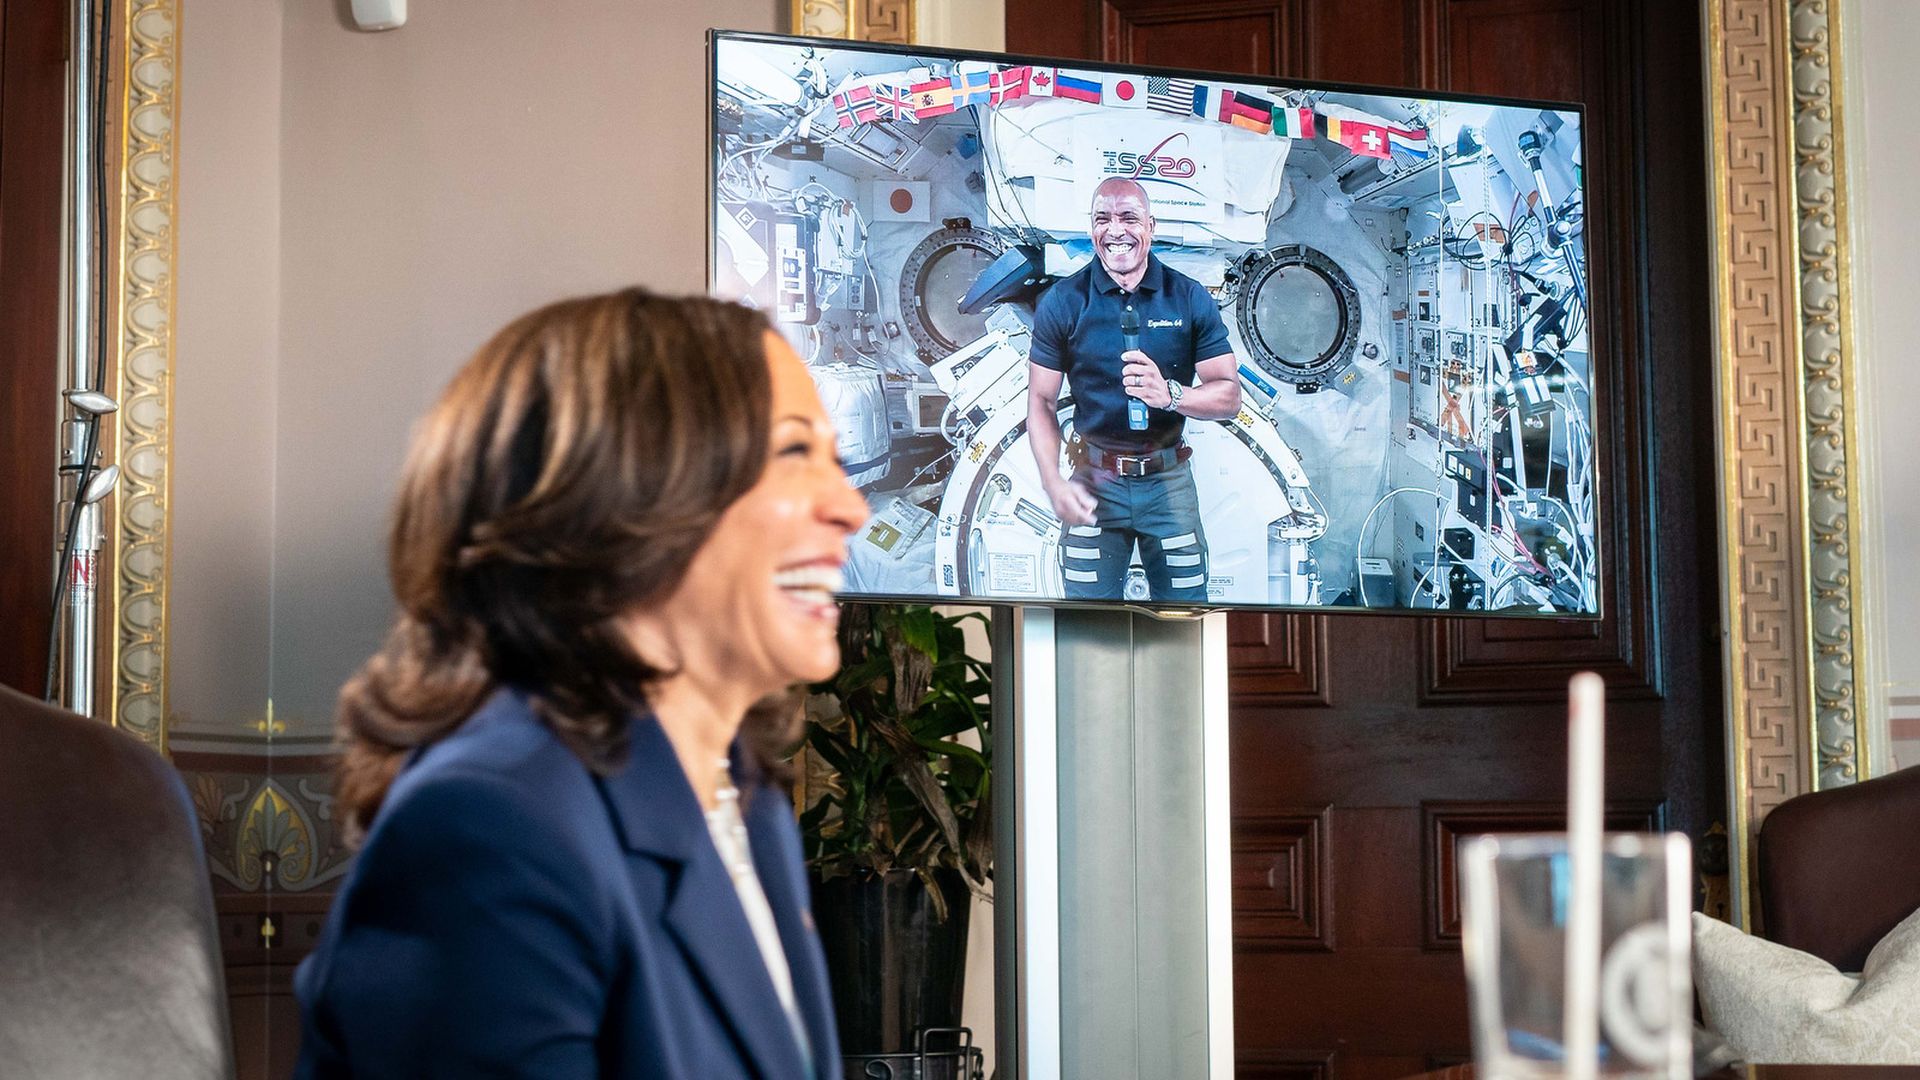 Kamala Harris smiles in the foreground while speaking with astronaut Victor Glover in space, pictured on a TV to the side of her.